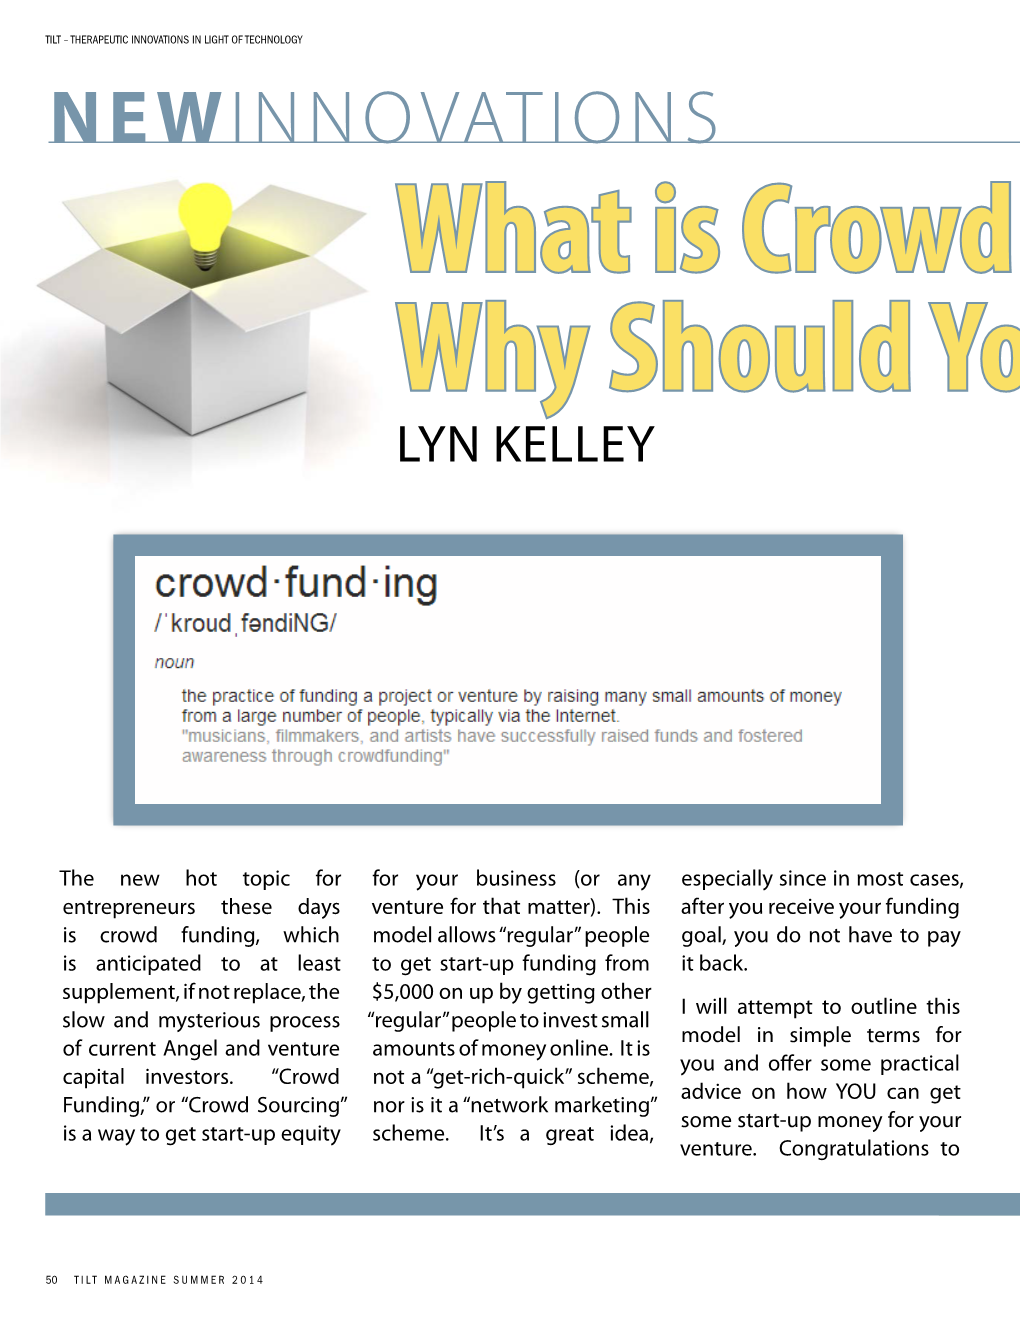 Newinnovations What Is Crowd Funding and Why Should You Get in on It? LYN KELLEY